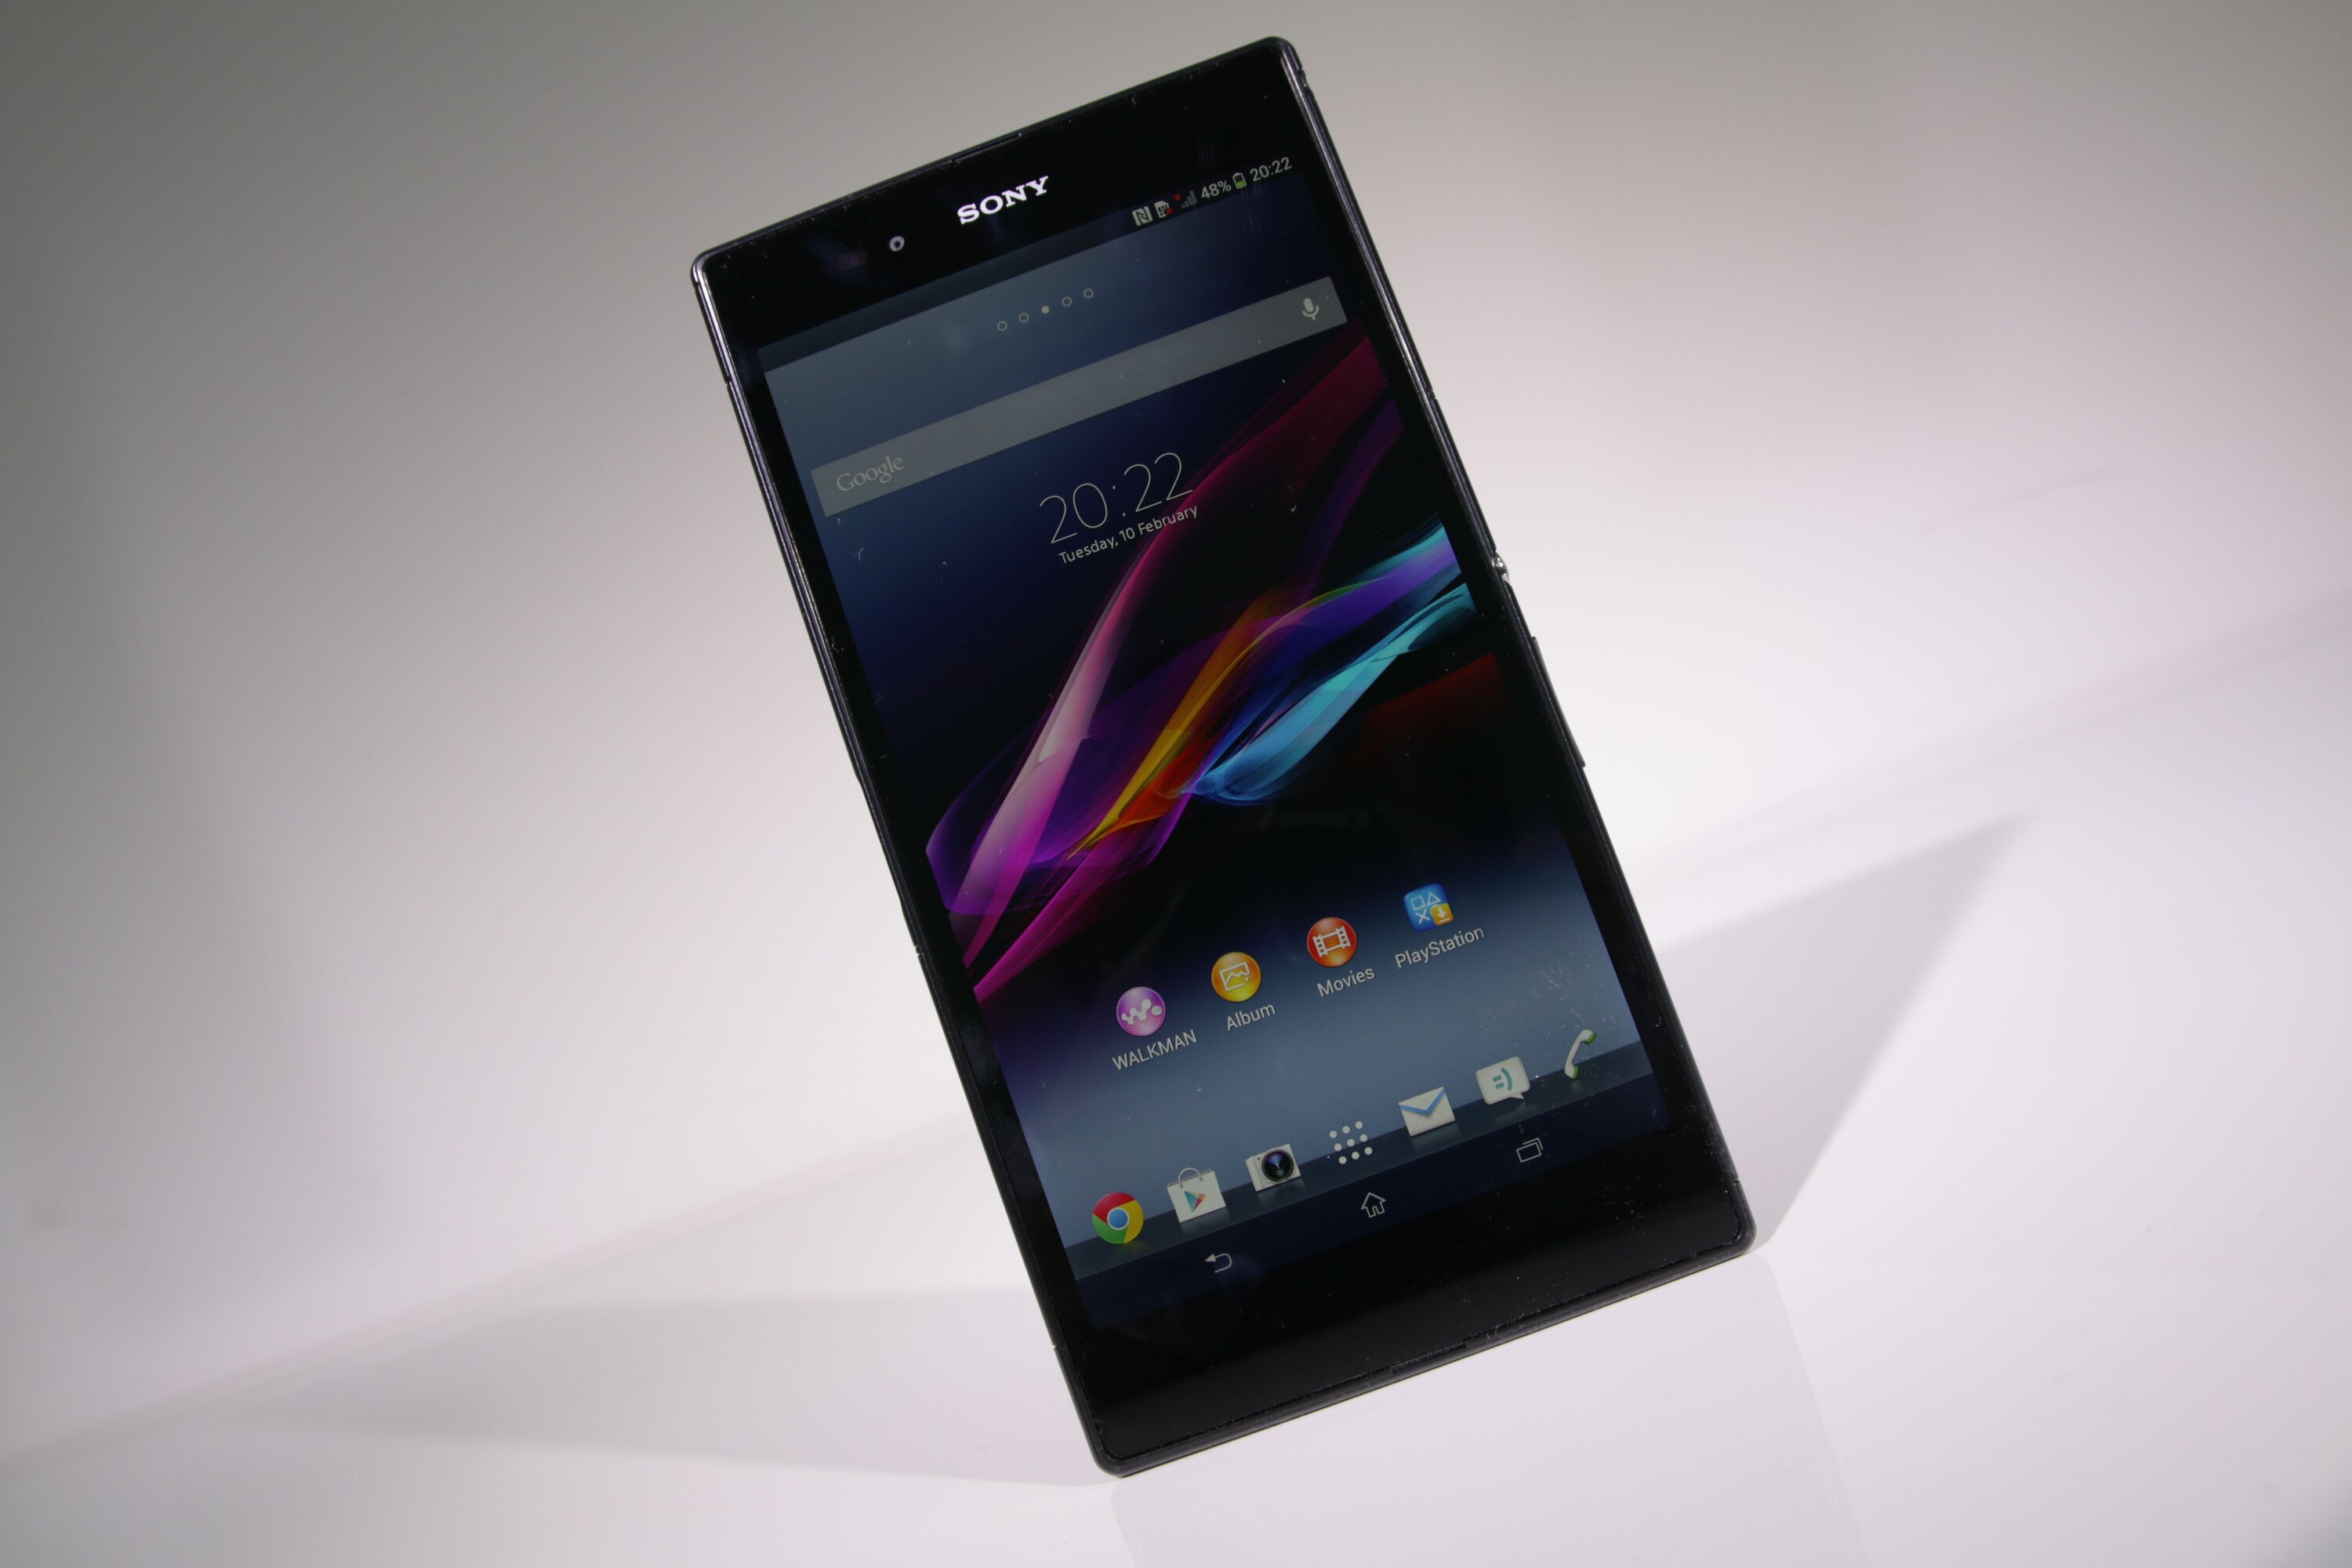 Efficient Data Sharing On Sony Xperia Z1: Quick Guide